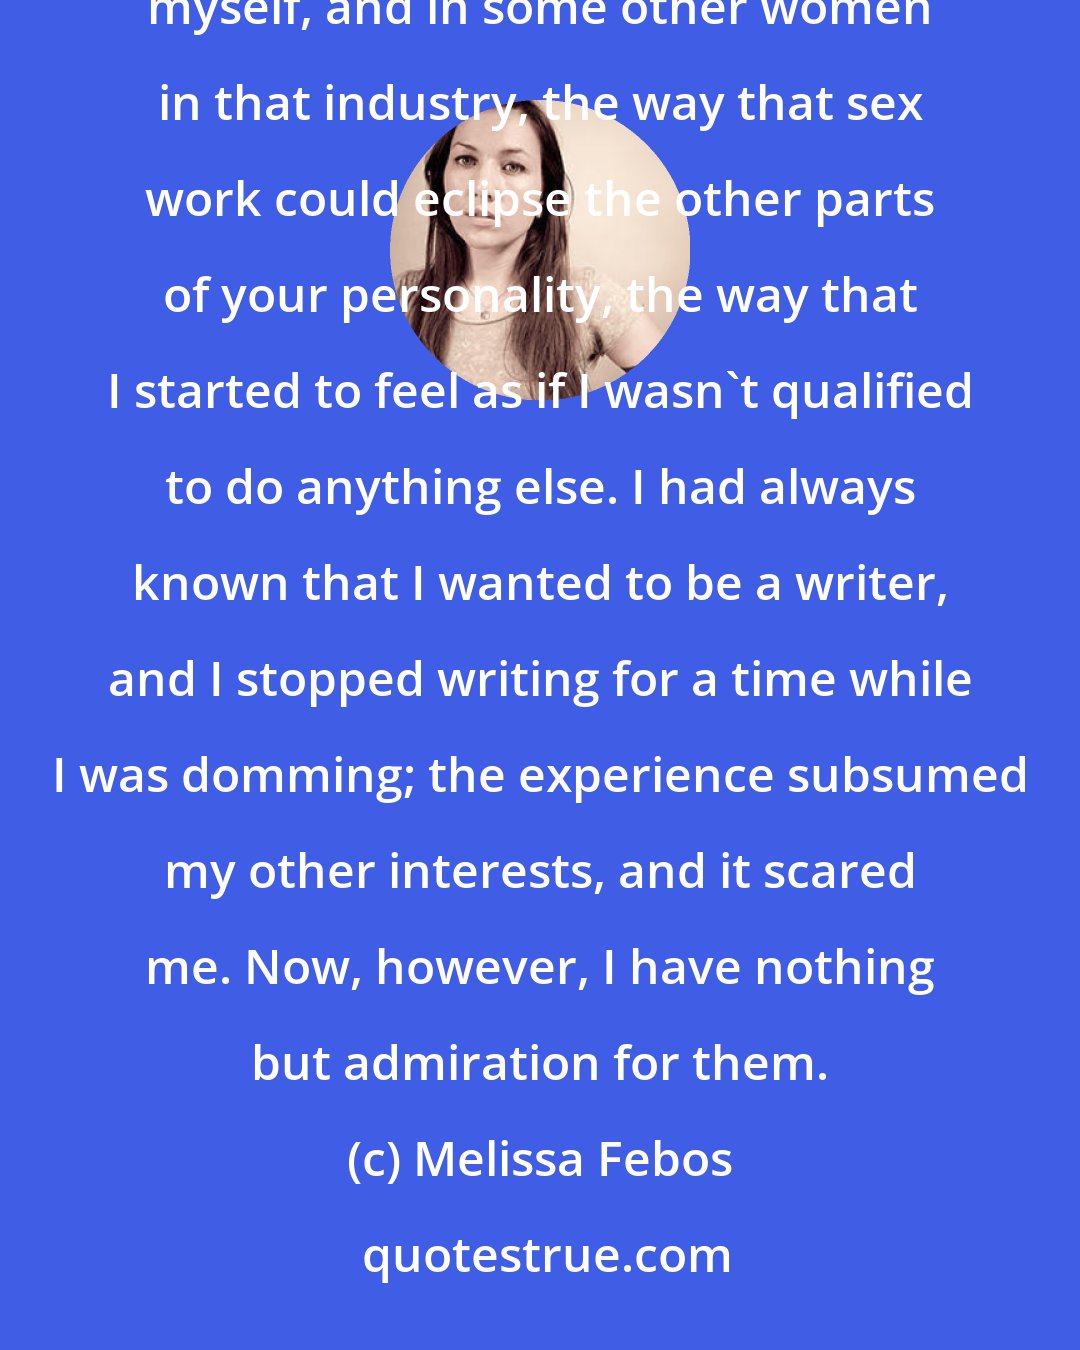 Melissa Febos: Early in my career as a domme, I both admired and feared becoming one of those career dommes. I saw, in myself, and in some other women in that industry, the way that sex work could eclipse the other parts of your personality, the way that I started to feel as if I wasn't qualified to do anything else. I had always known that I wanted to be a writer, and I stopped writing for a time while I was domming; the experience subsumed my other interests, and it scared me. Now, however, I have nothing but admiration for them.